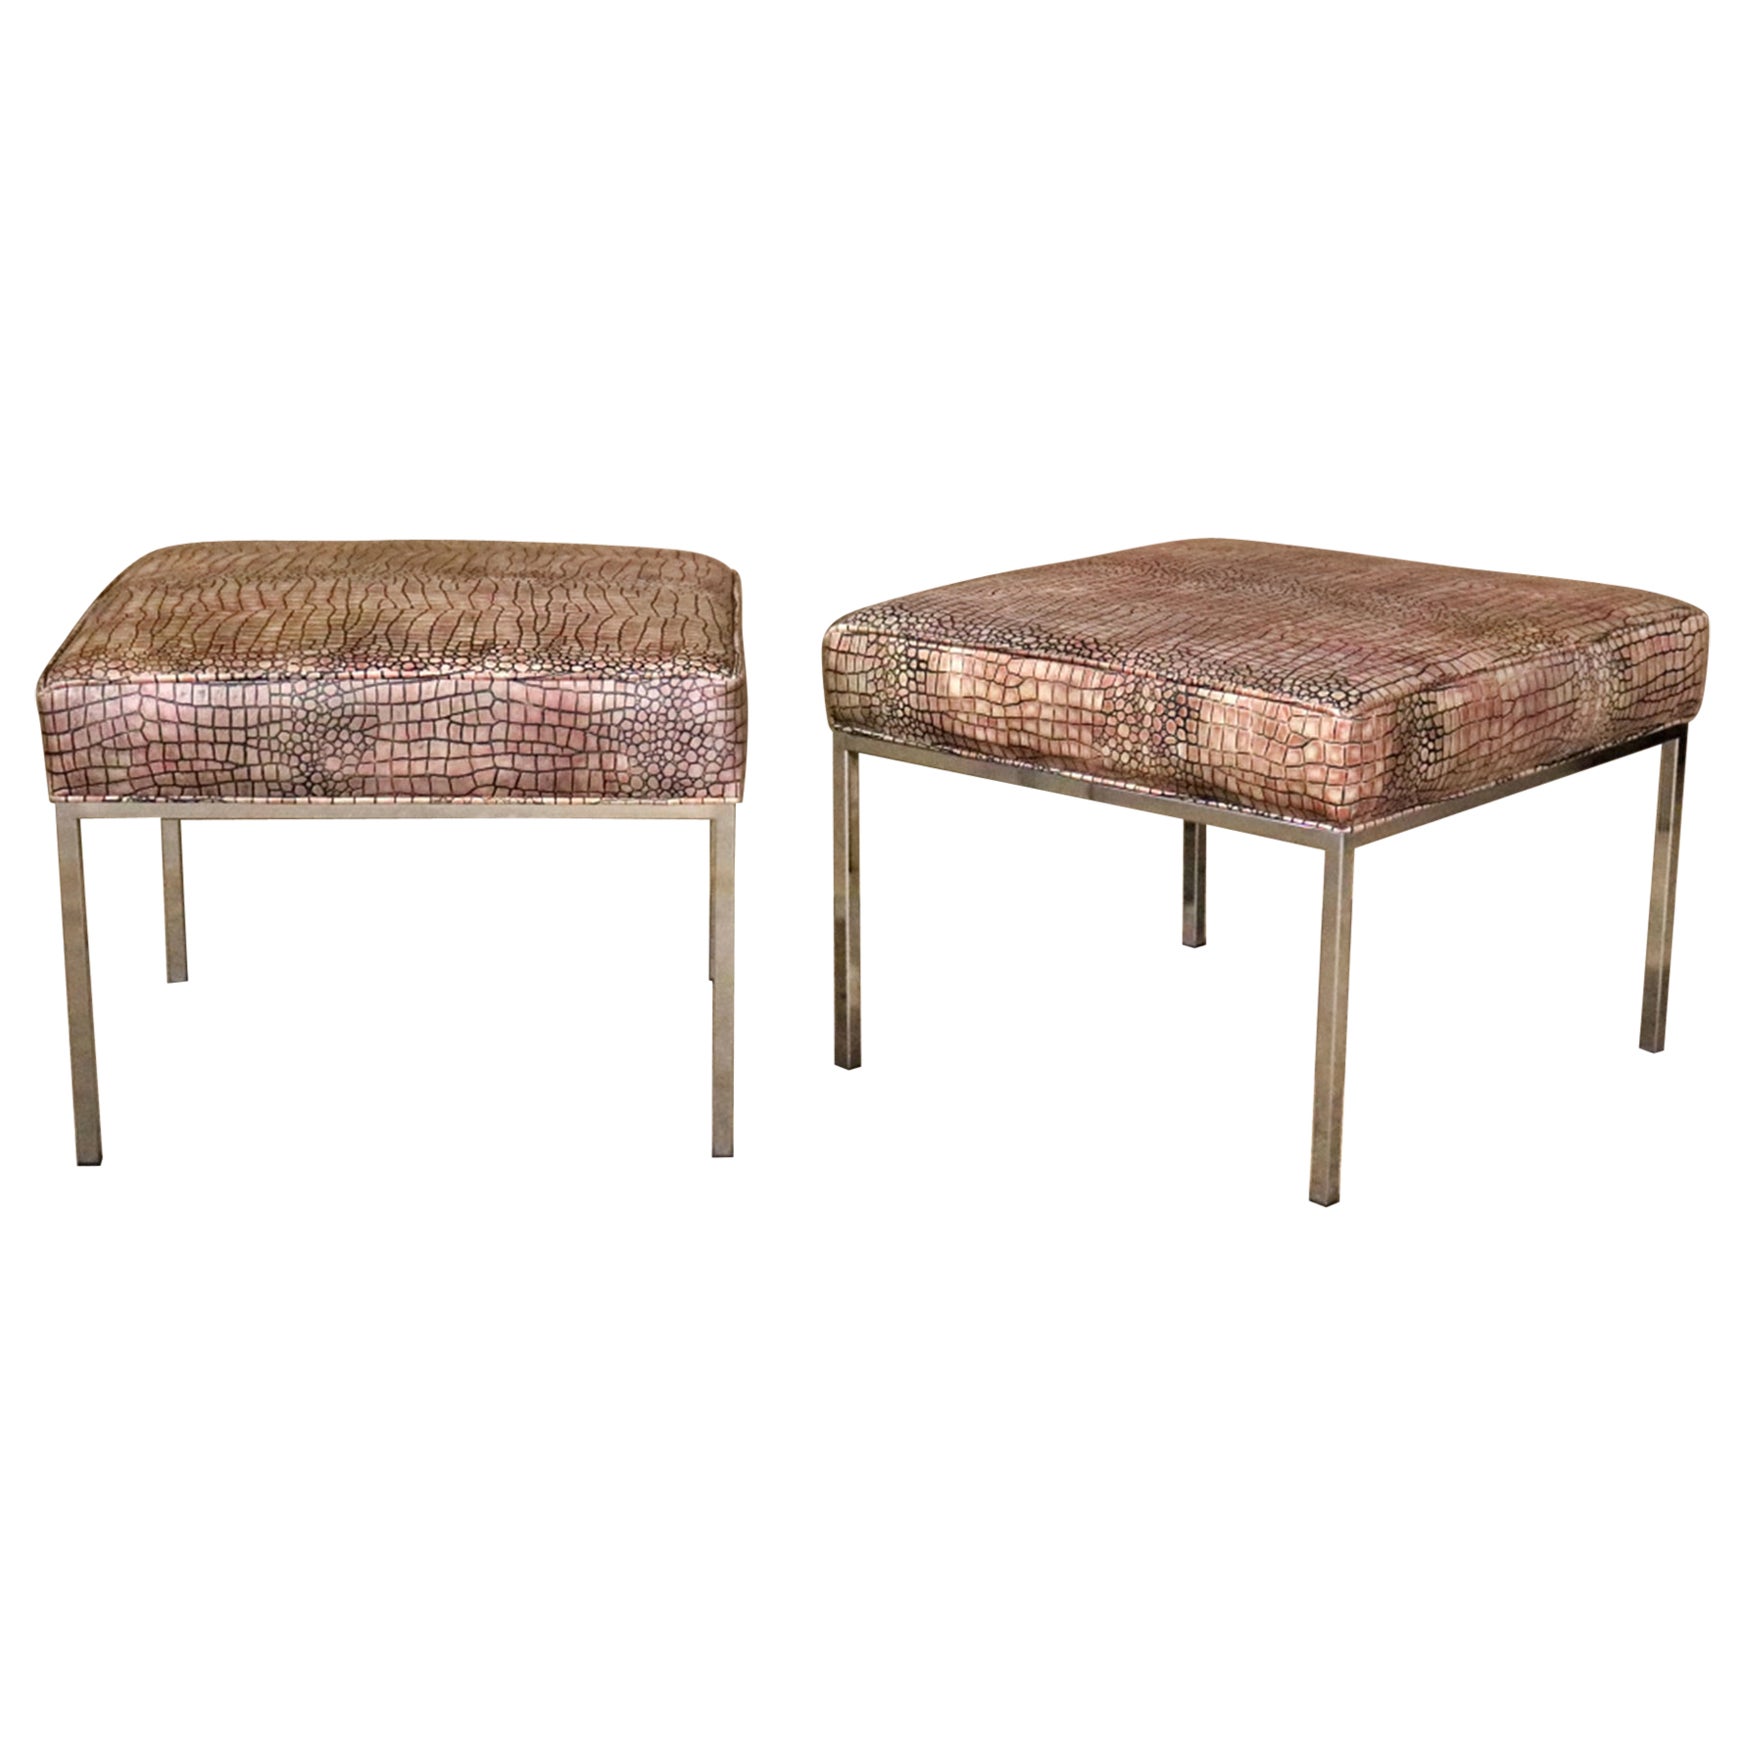 Pair of Milo Baughman Style Faux Crocodilie Upholstered Chrome Stools Ottomans For Sale